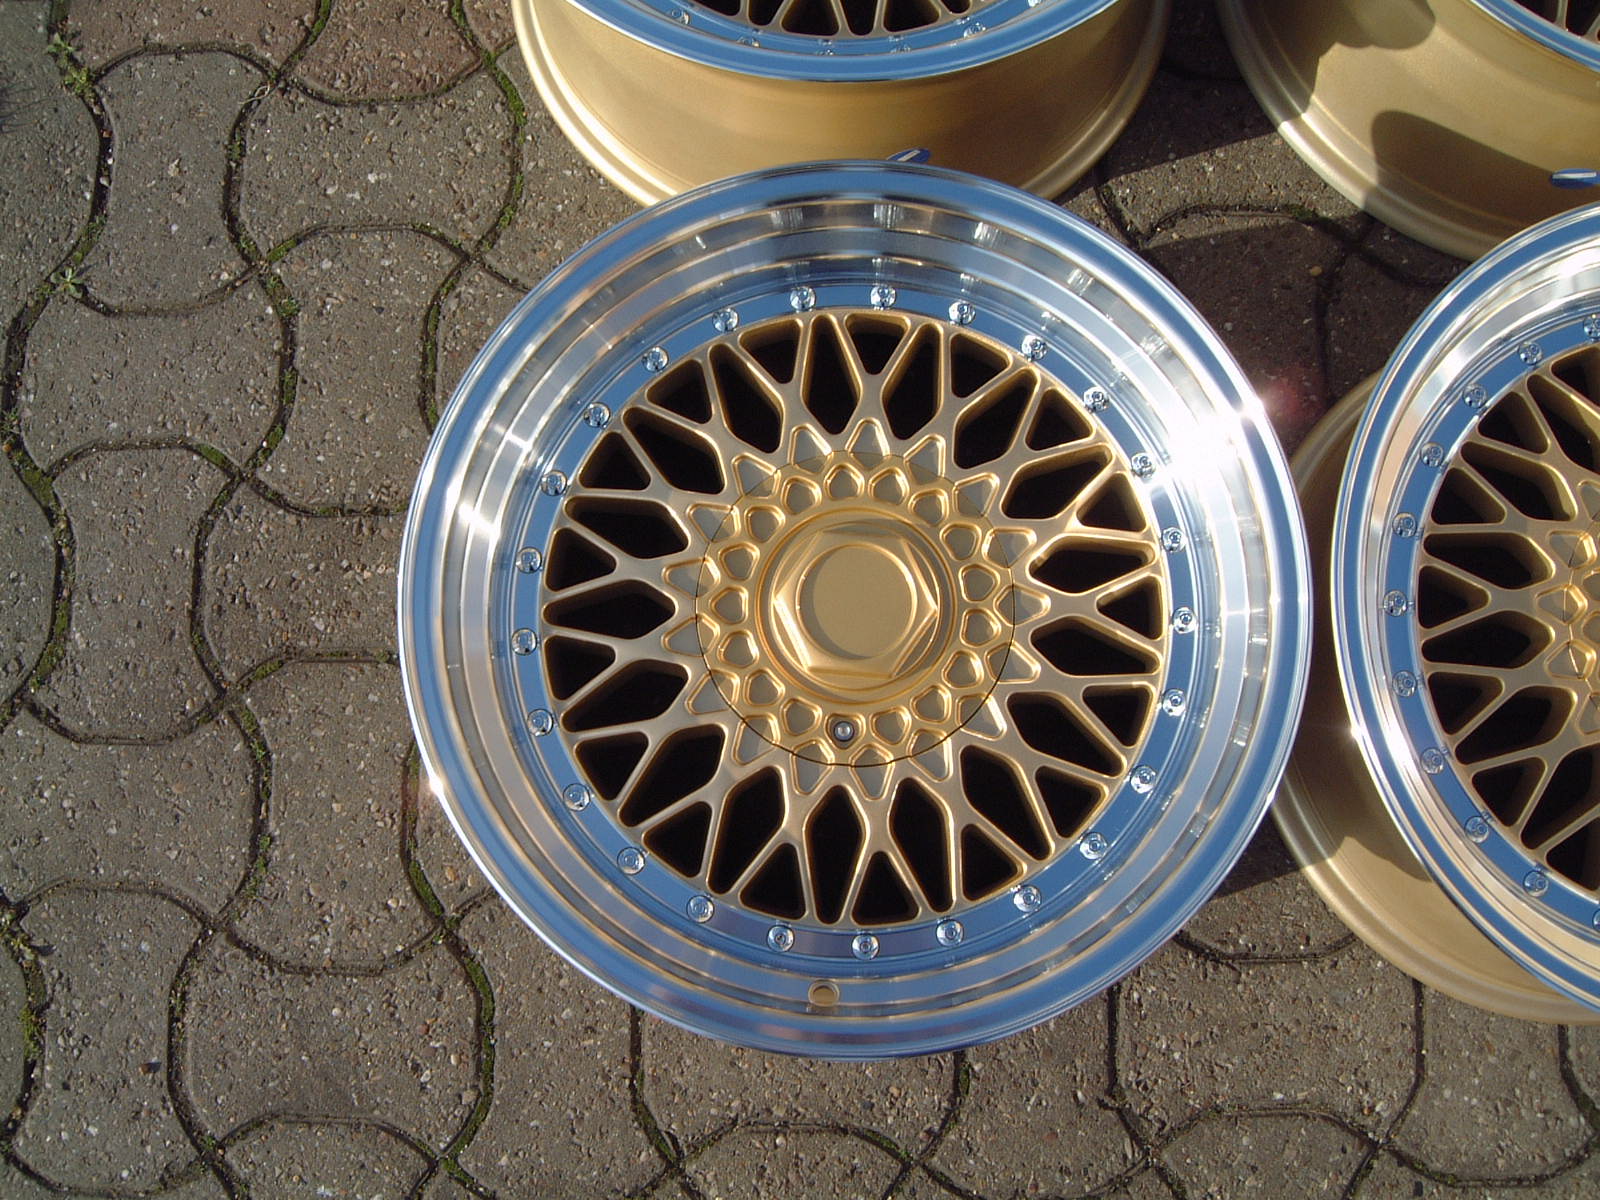 NEW 15" DARE RS ALLOY WHEELS IN MOTORSPORT GOLD, DEEP DISH 8" REAR